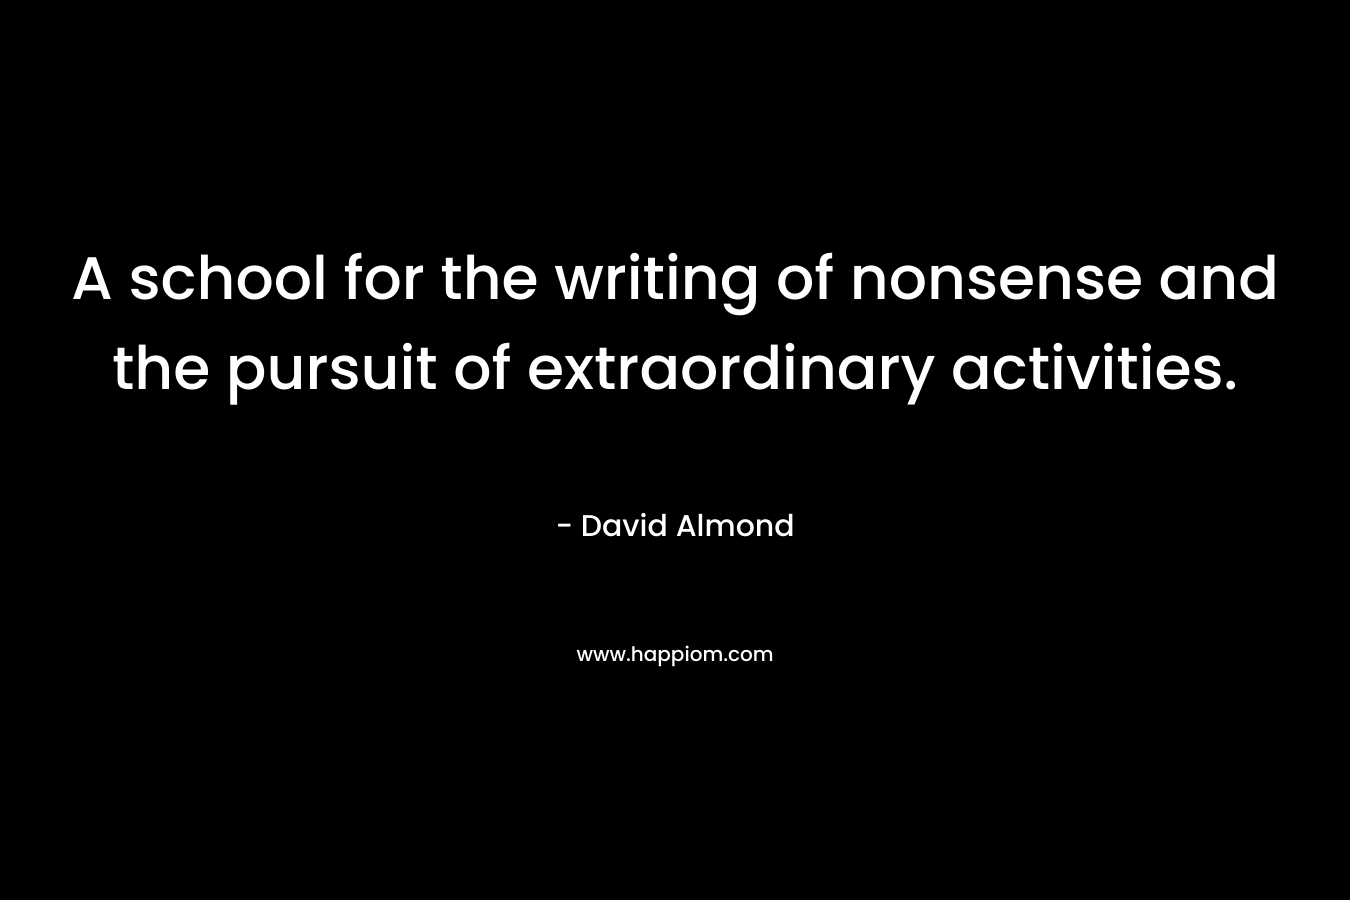 A school for the writing of nonsense and the pursuit of extraordinary activities. – David Almond